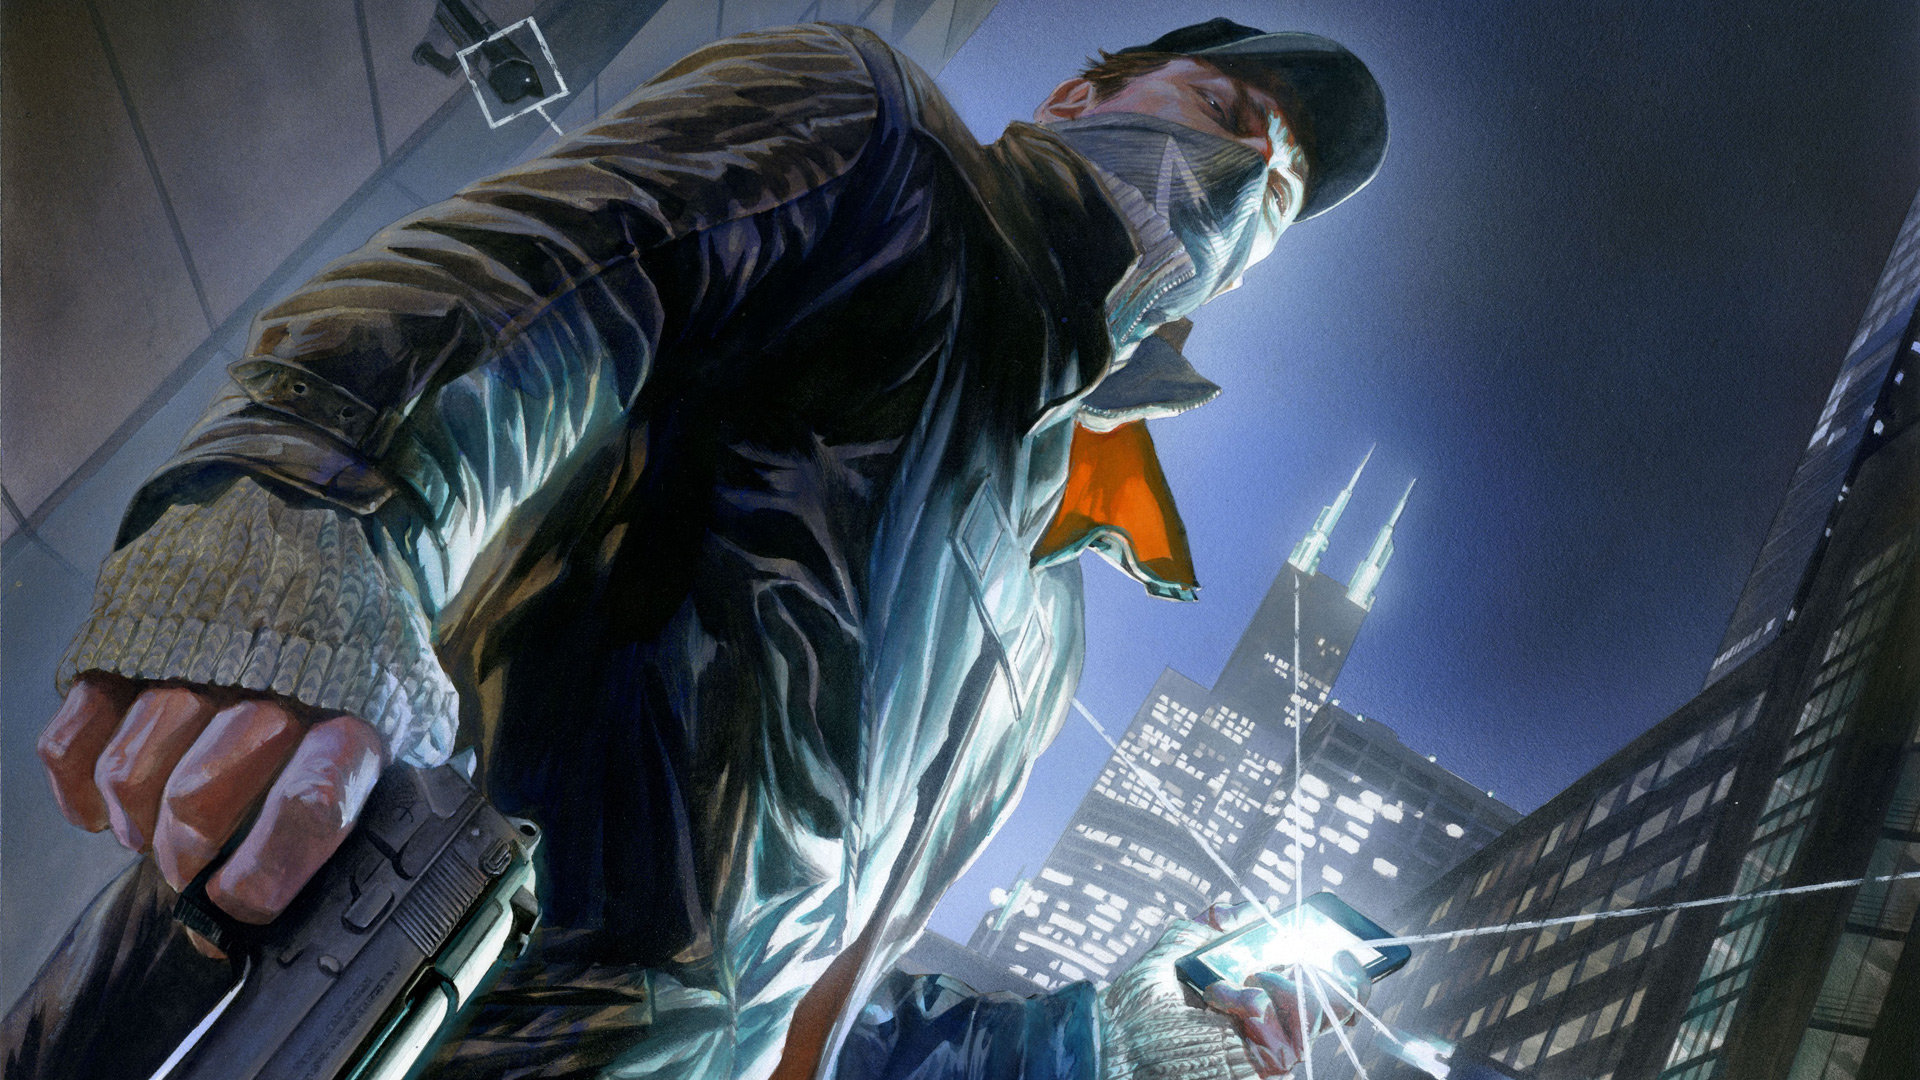 Awesome Watch Dogs free wallpaper ID:117298 for hd 1920x1080 computer